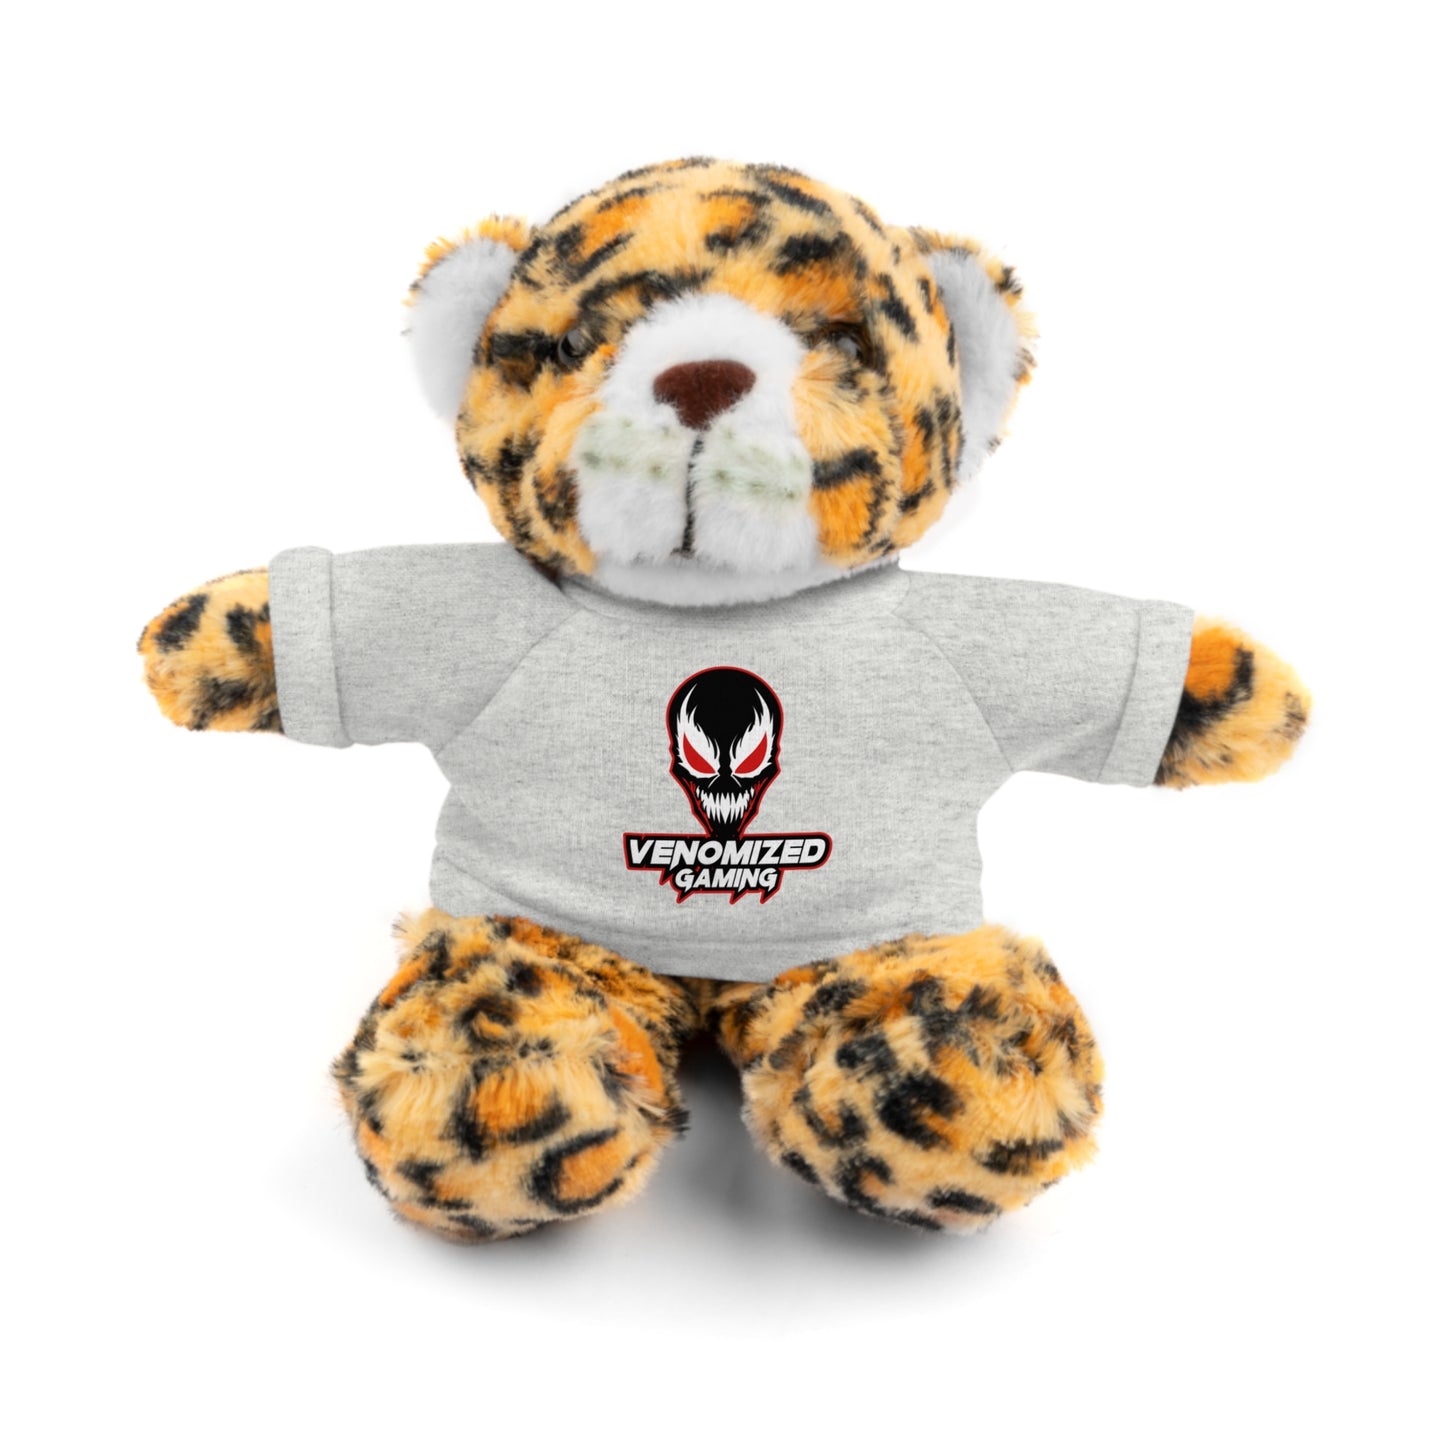 Venomized Gaming Stuffed Animals with Tee